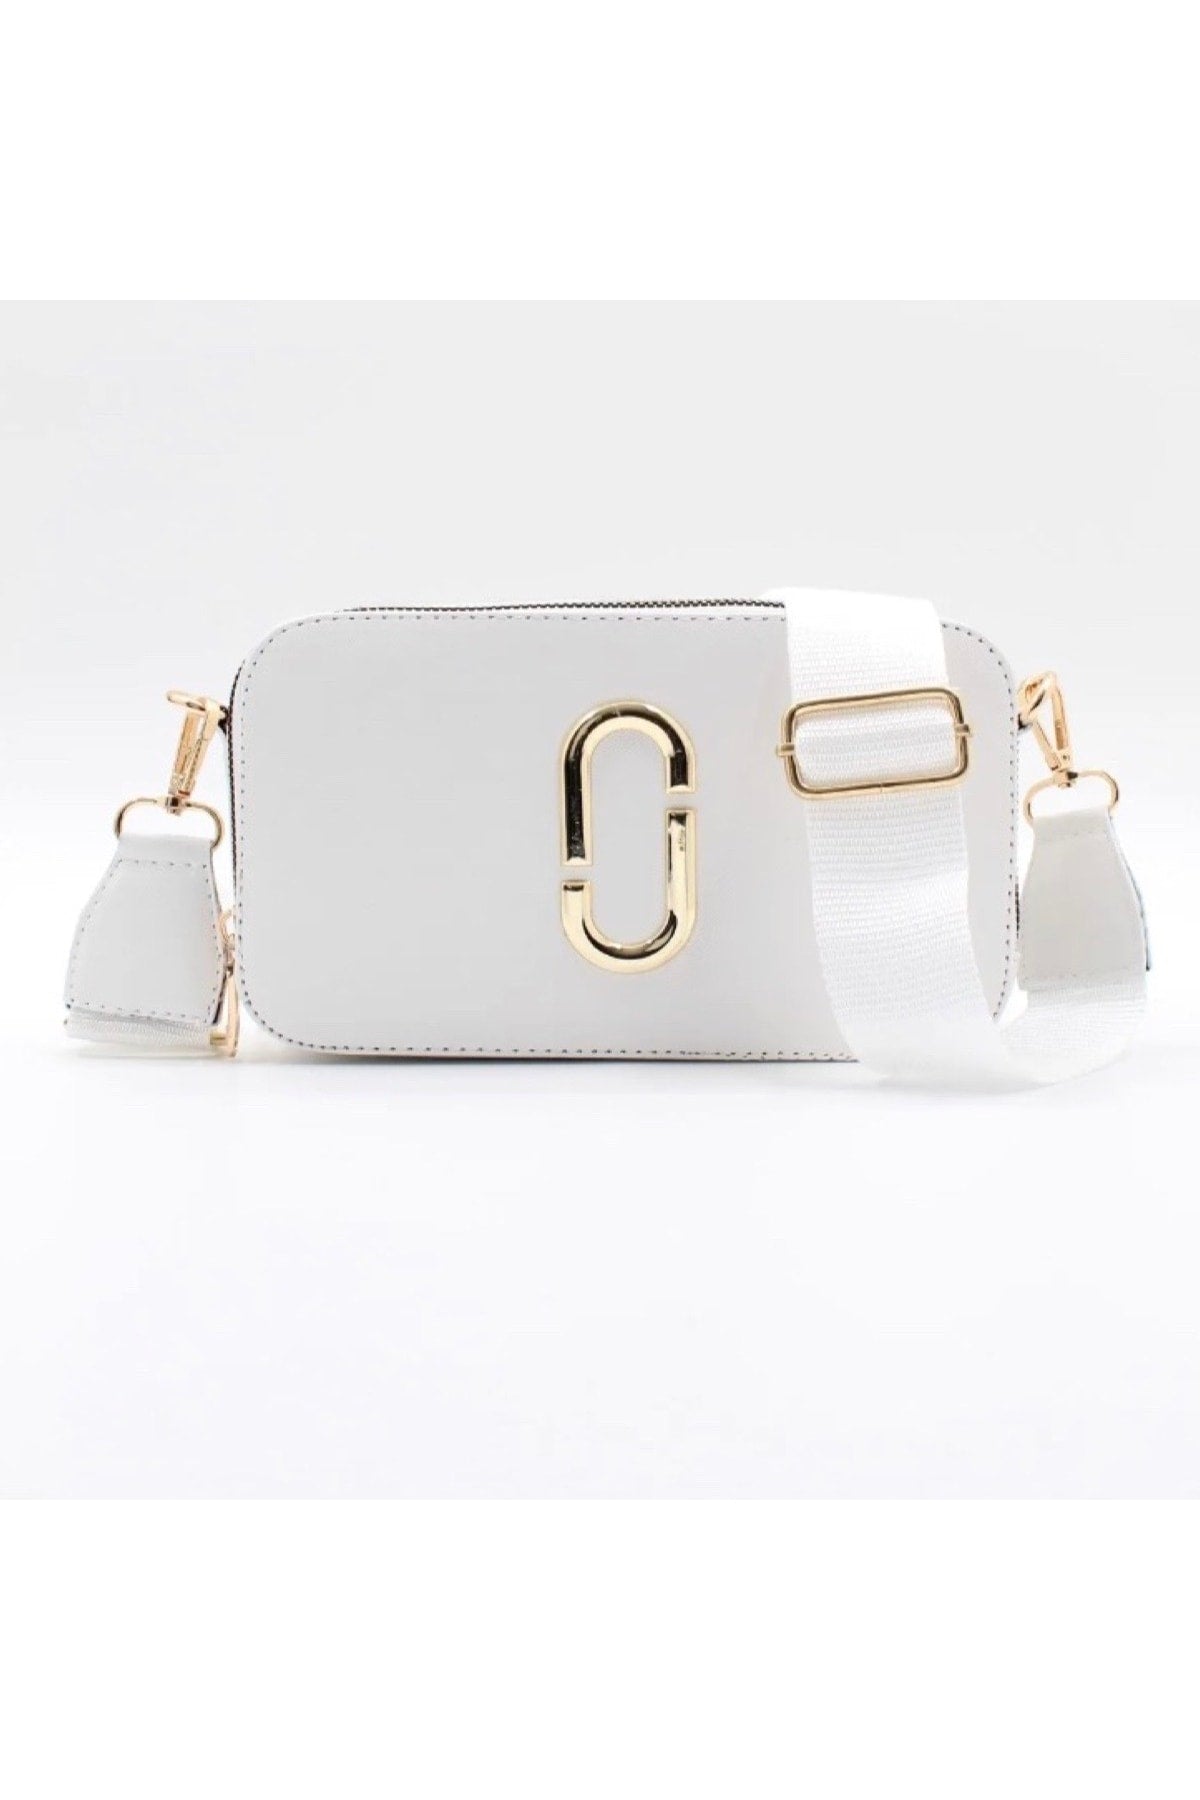 Women's Canta White Quality Sport Stylish Crossbody Shoulder Bag with Two Compartment Pockets (SMALL SIZE)